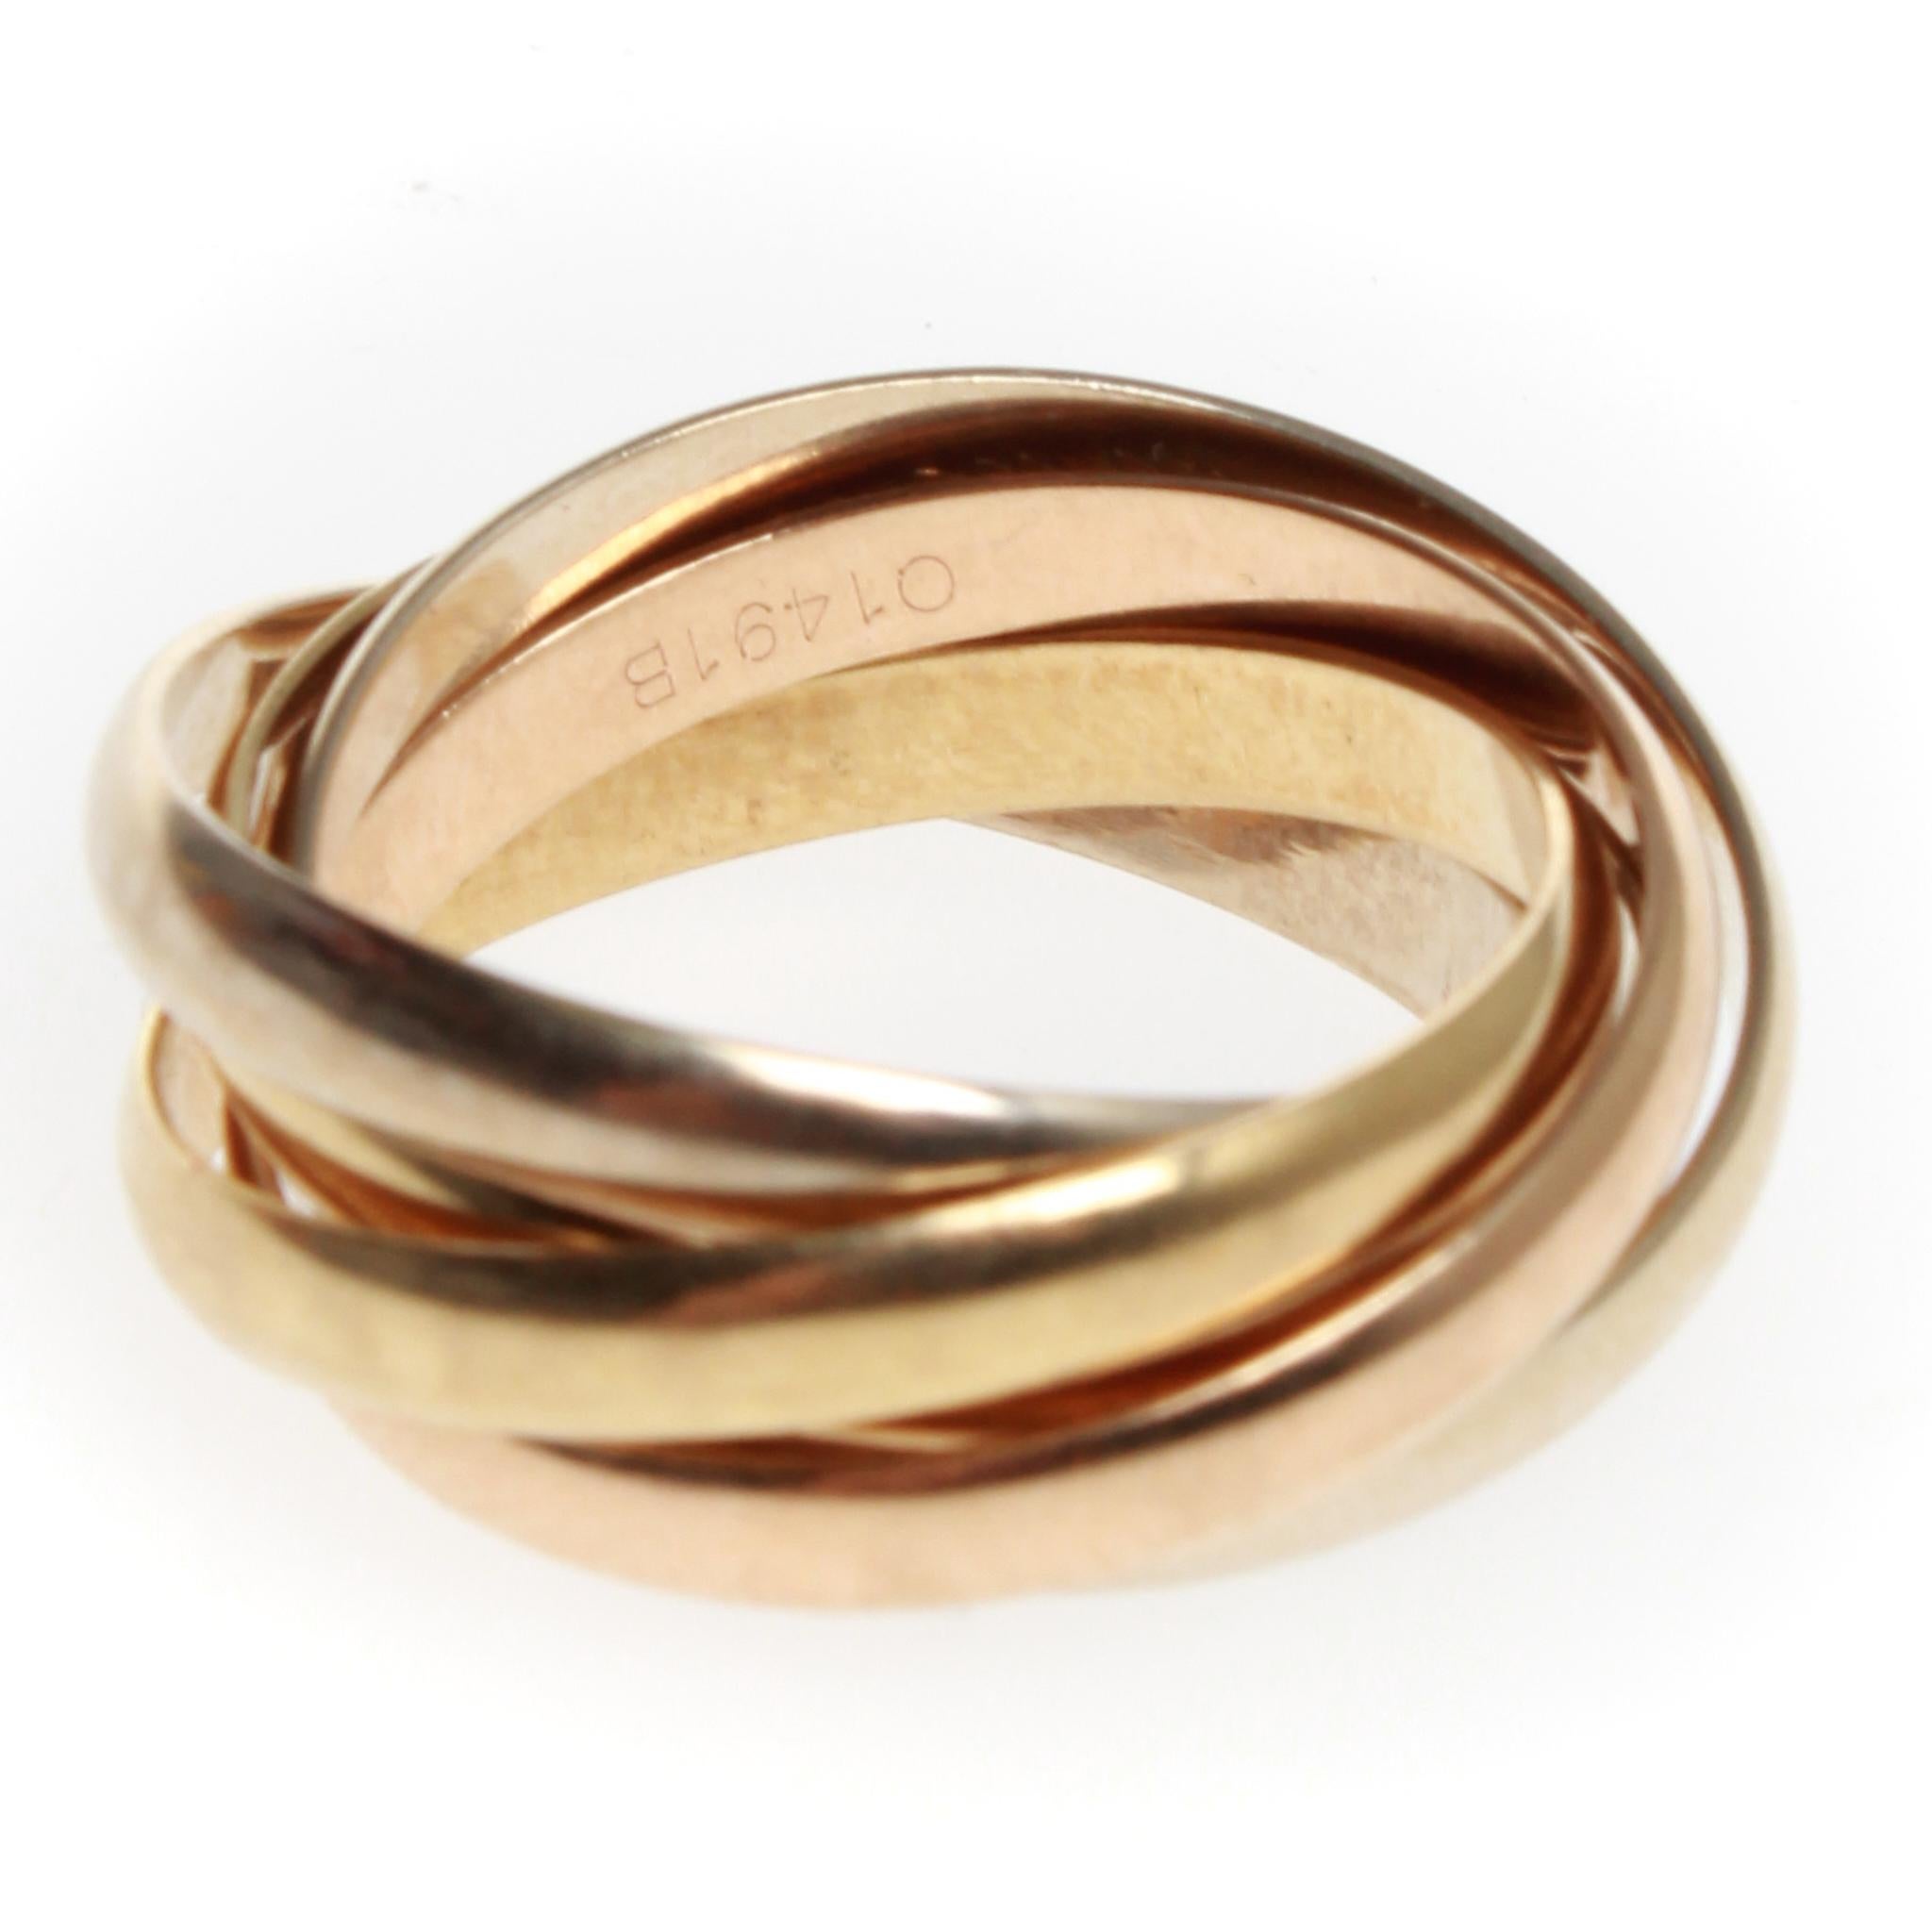 Gorgous 18Kt Gold les must de Cartier 5-Band Trinity Ring. This trinity ring consists of 2 Yellow Bands, 2 White Gold Bands, and 1 Rose Gold Band.
US Size 5.